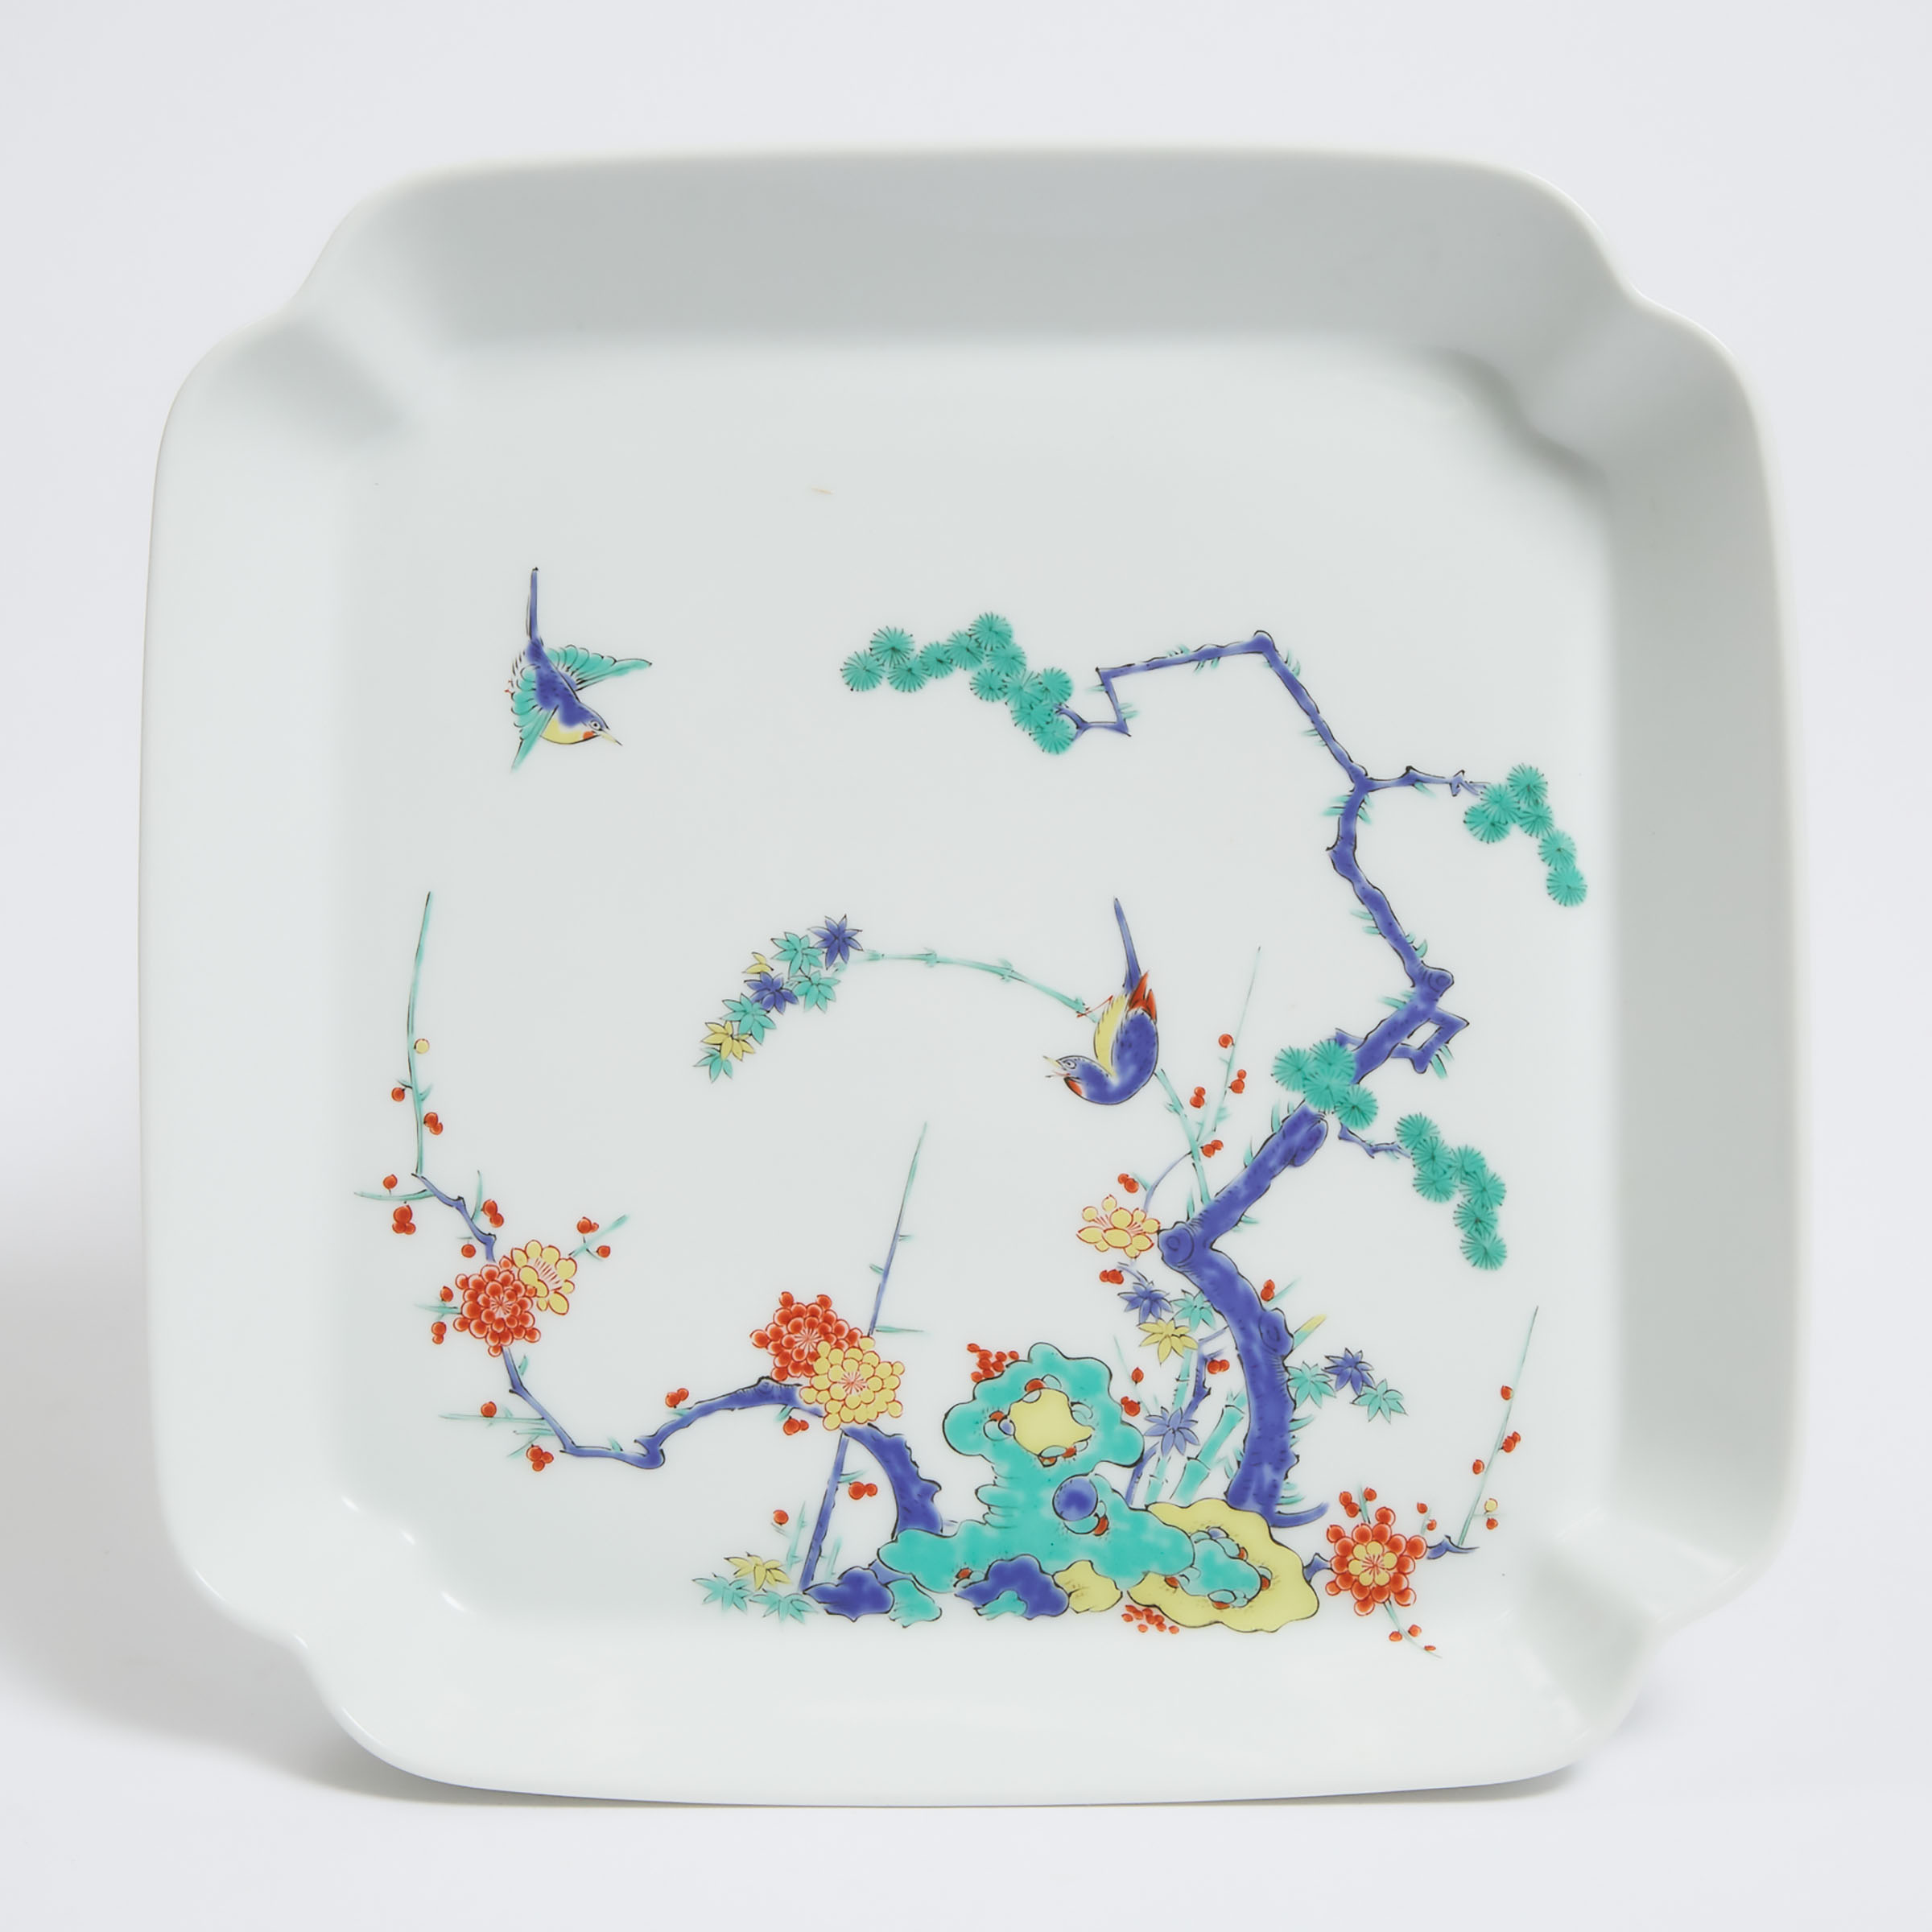 A Large Kakiemon Square Dish, Late 19th/Early 20th Century